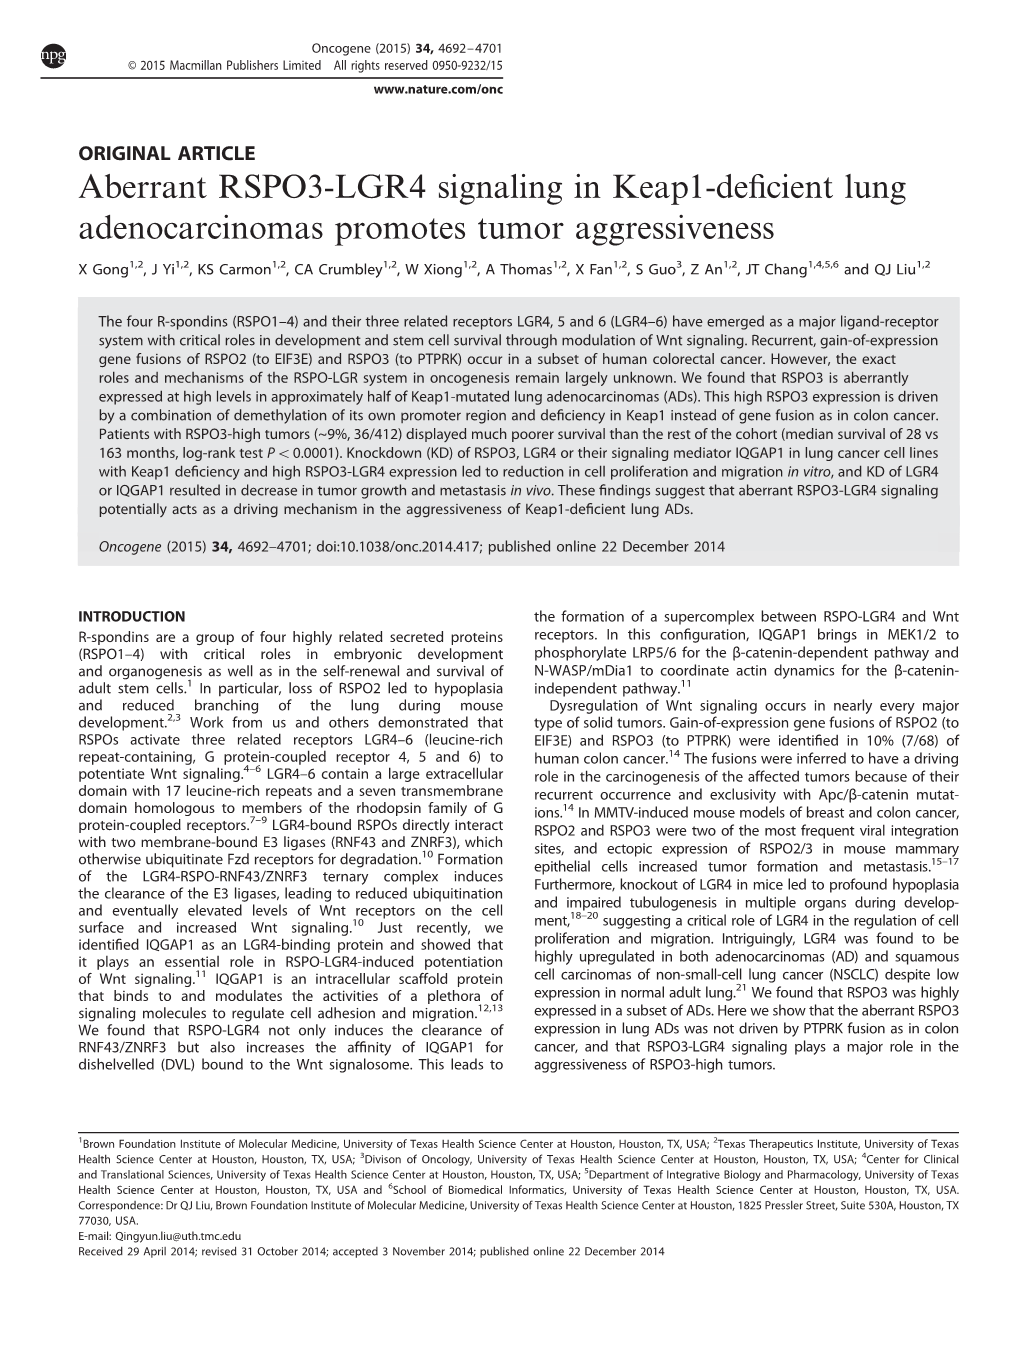 Aberrant RSPO3-LGR4 Signaling in Keap1-Deficient Lung